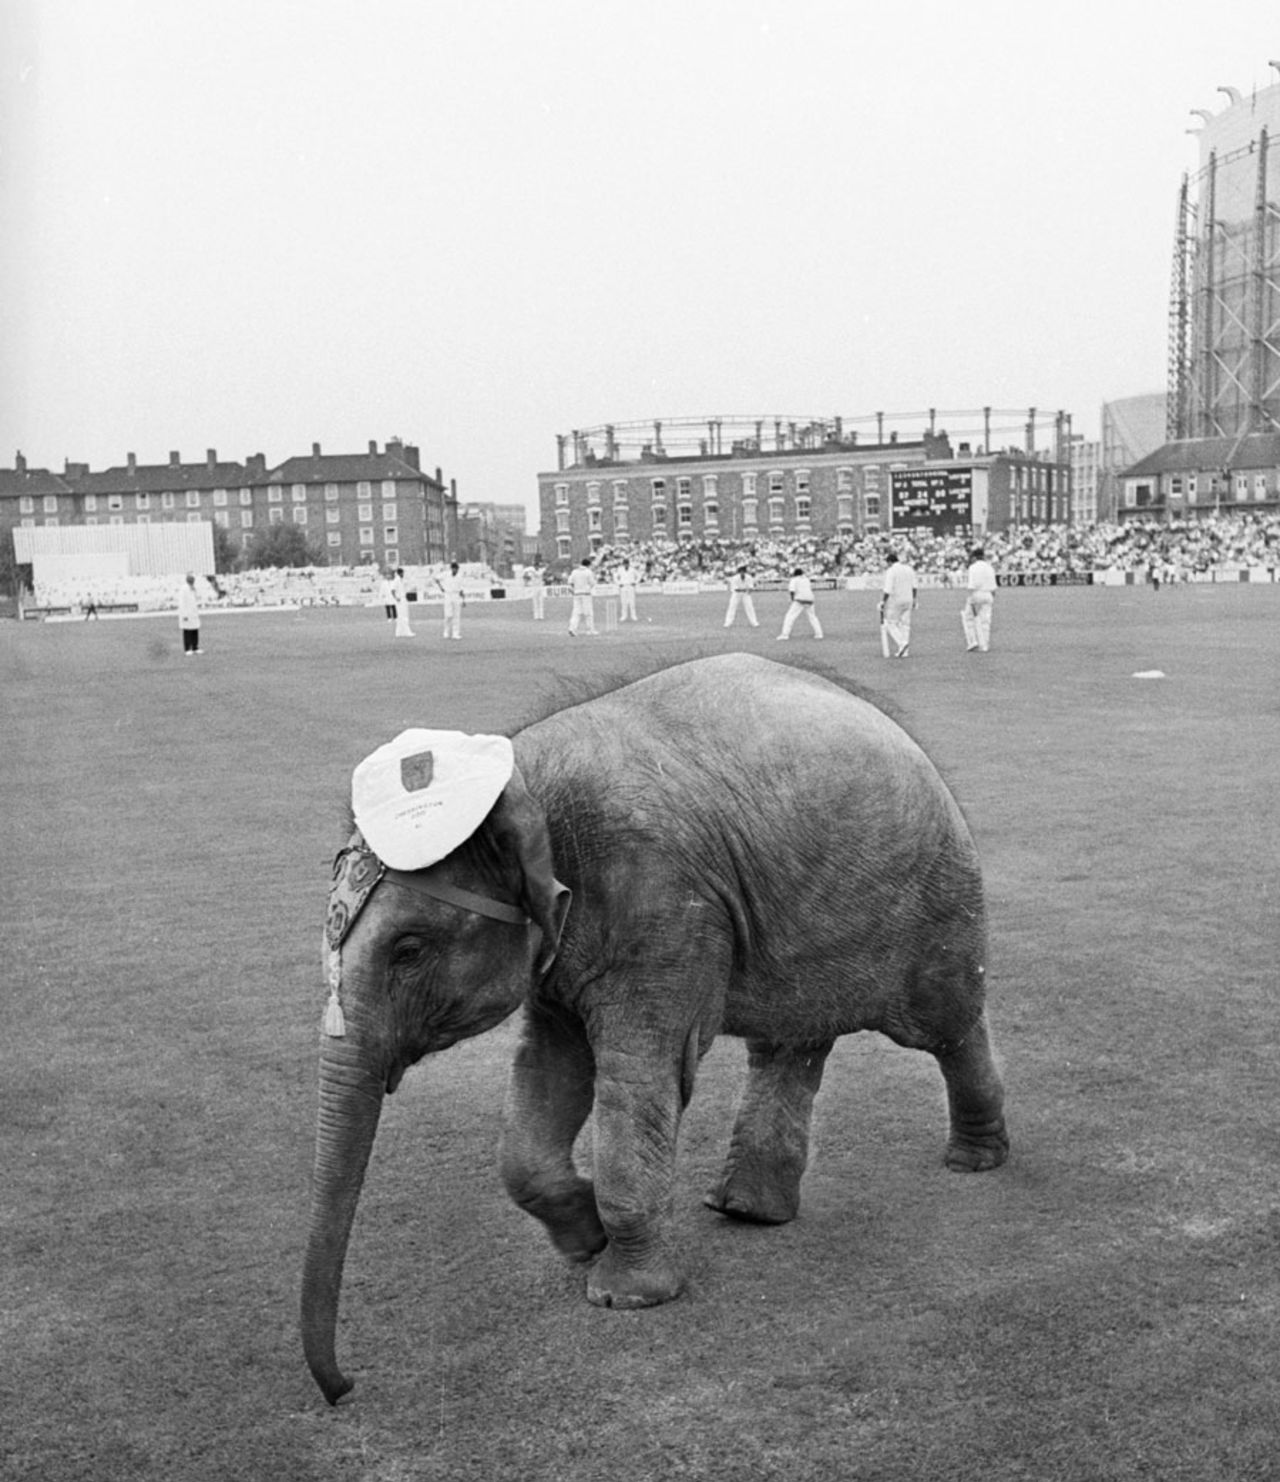 Bella, an Indian elephant from Chessington Zoo, in the outfield at The Oval, England v India, third Test, 24 August 1971 